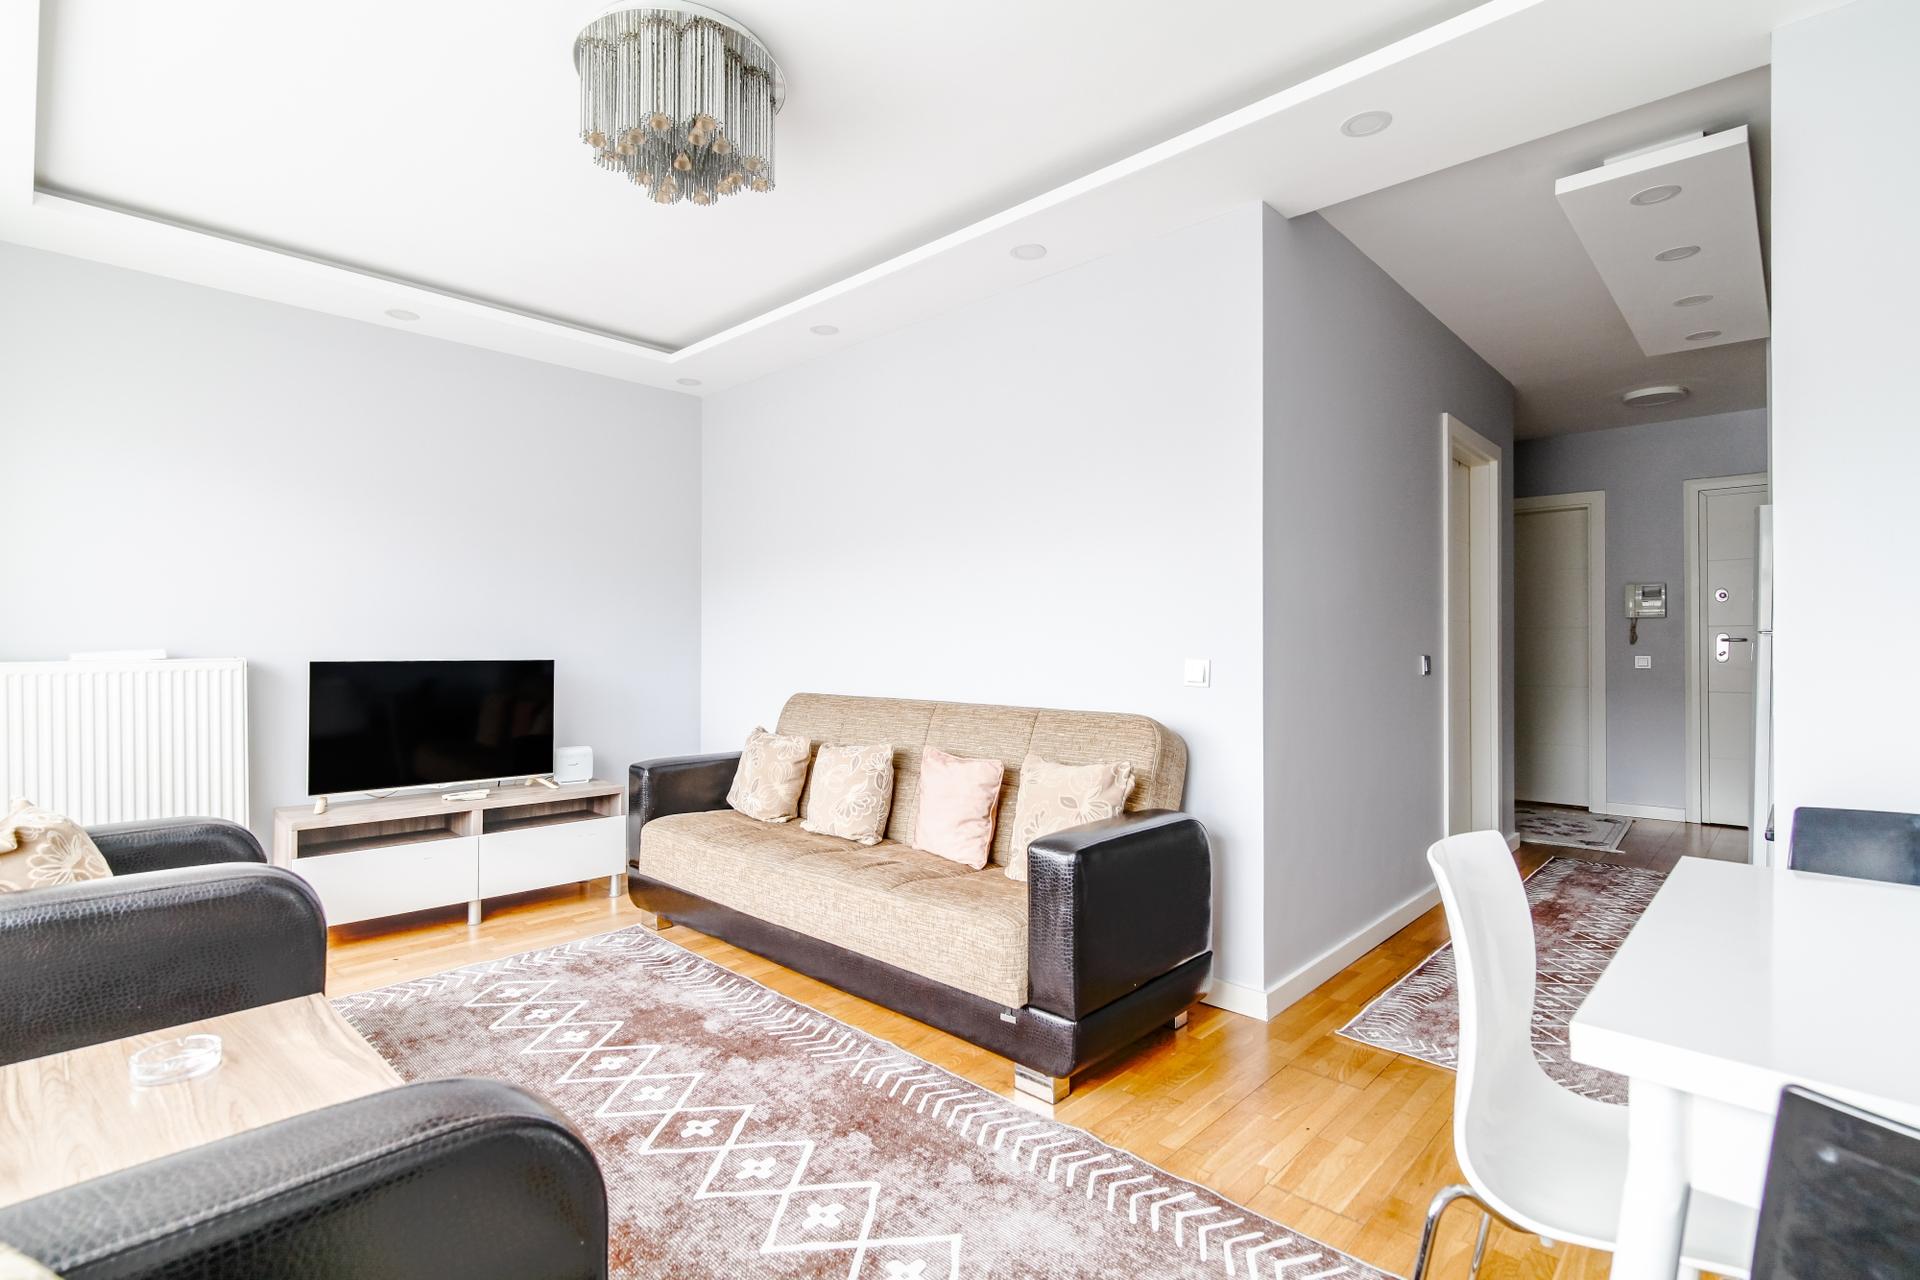 A comfortable accommodation experience awaits you in Sisli, in the center of Istanbul.